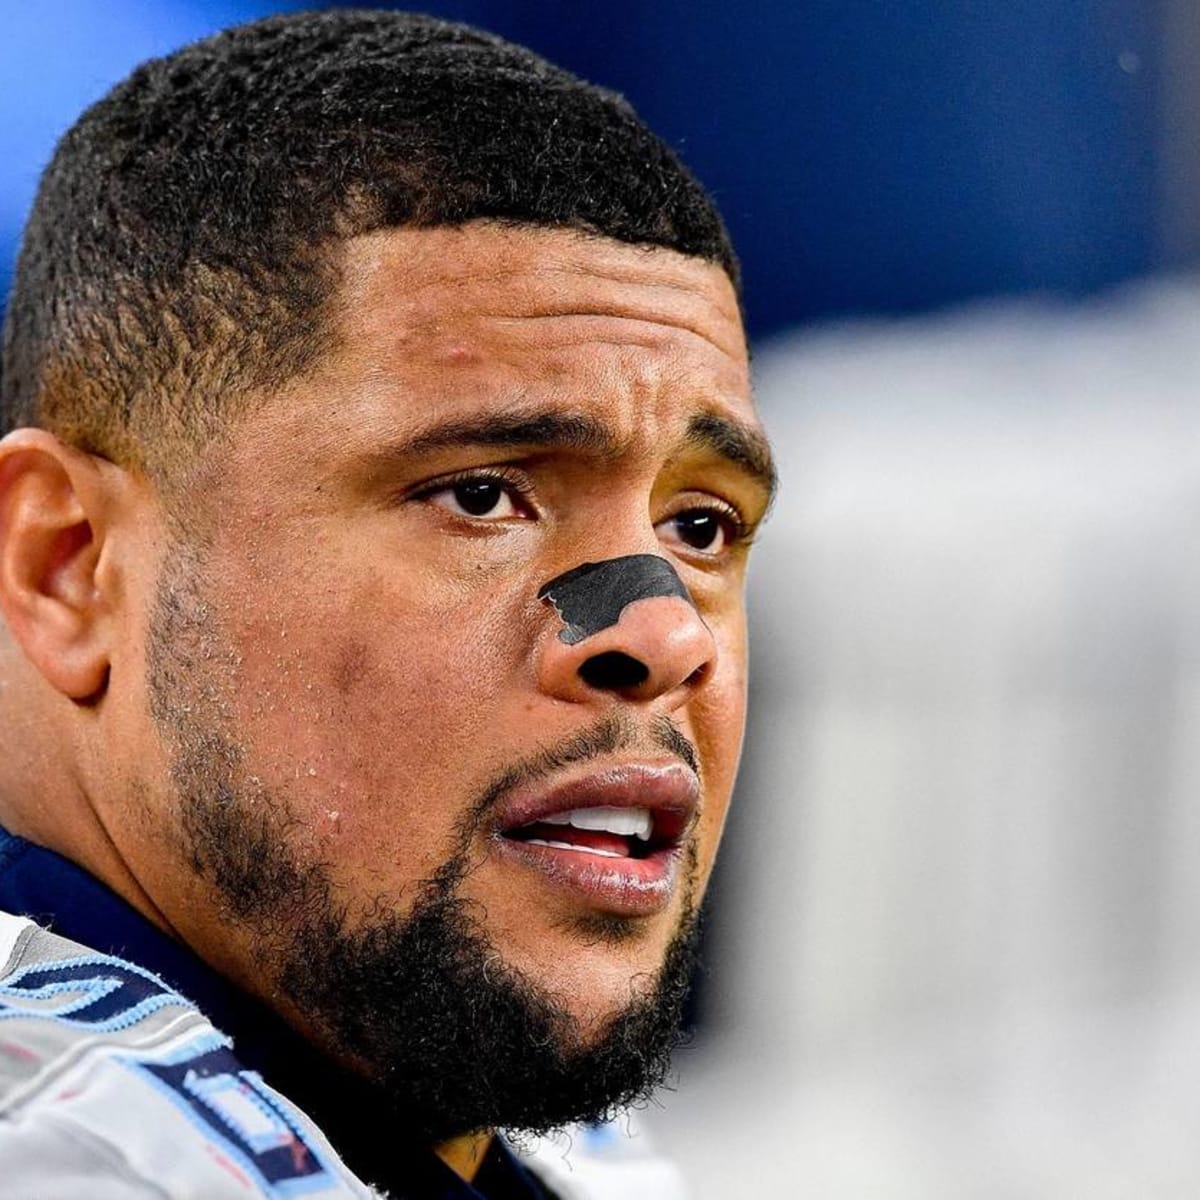 Rodger Saffold on Instagram: Rich N***a Sh*t I do a lot of